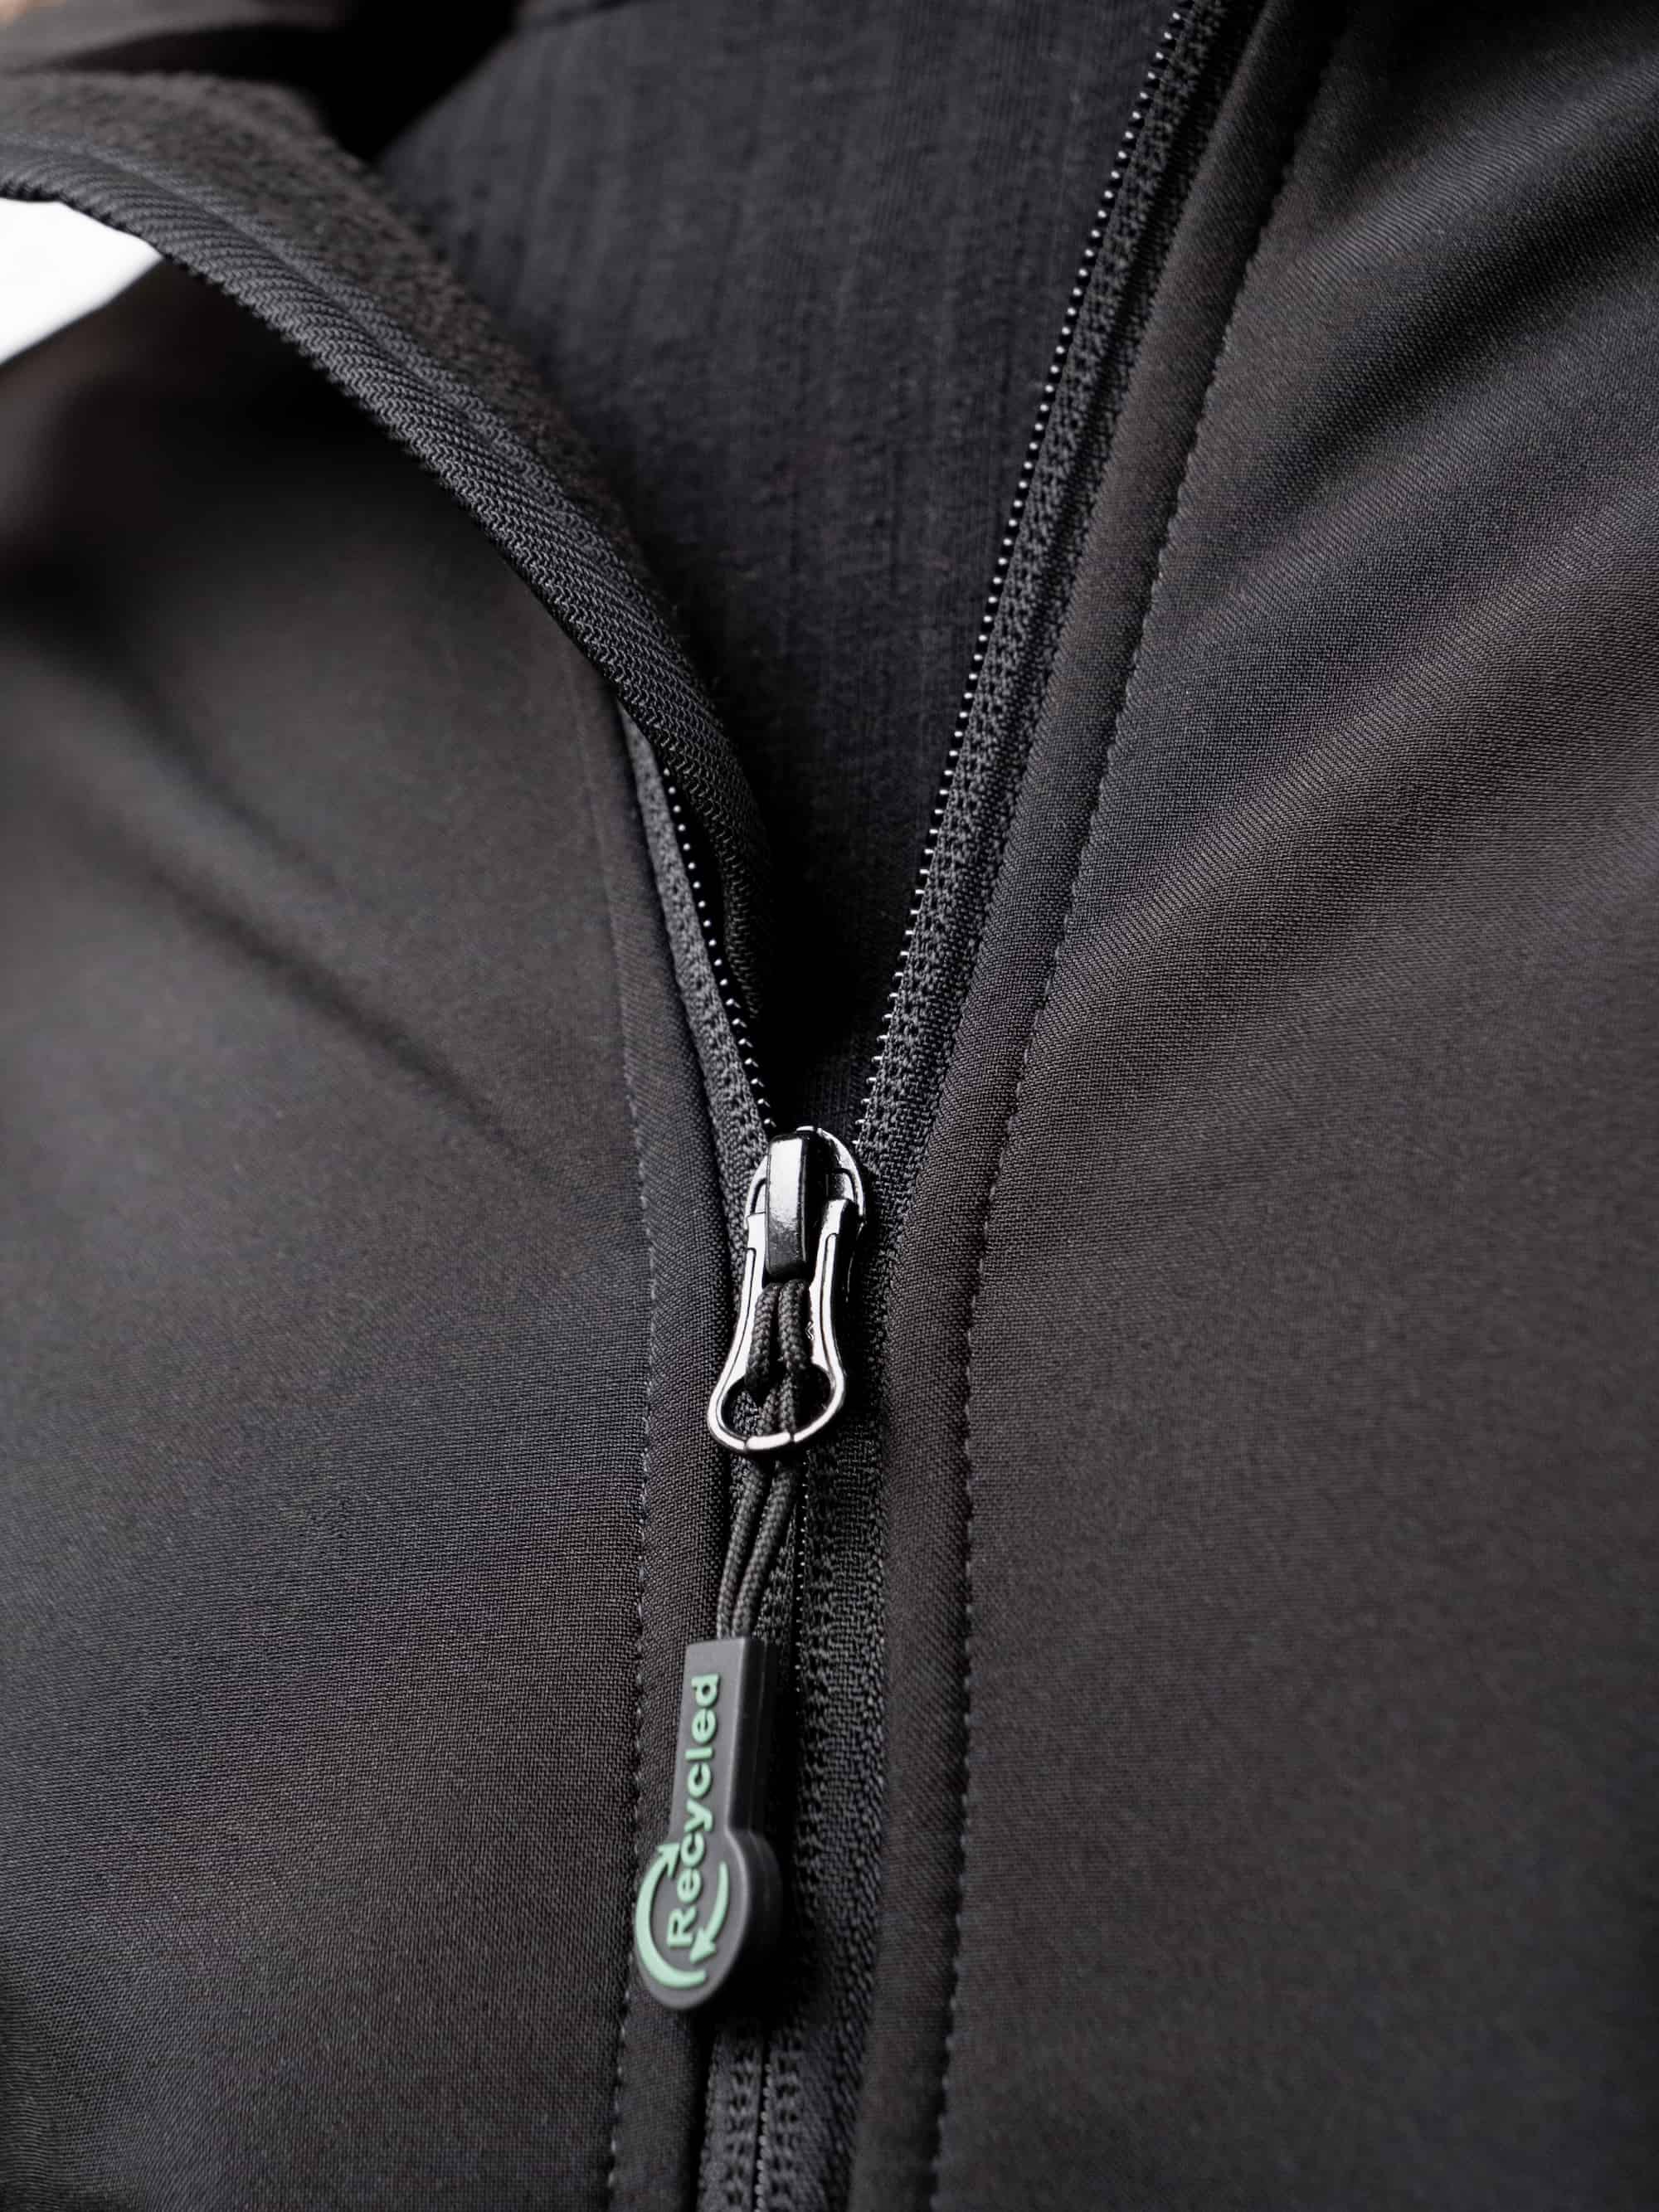 Eco-friendly zipper made from post-consumer recycled material